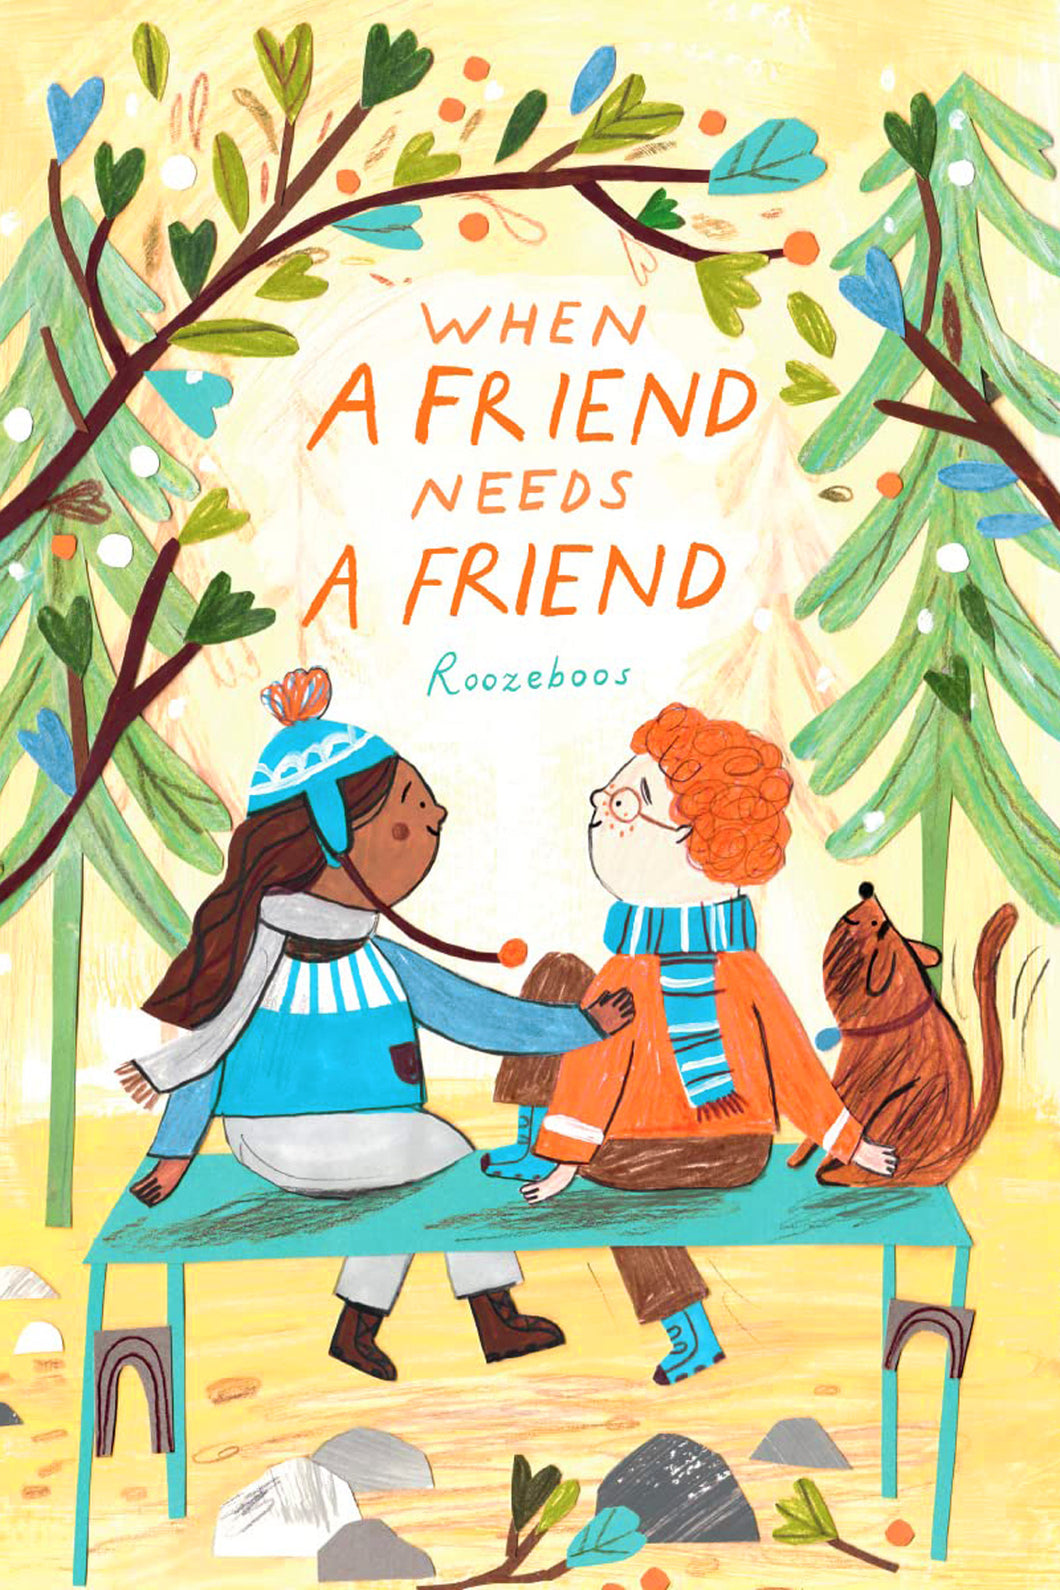 When A Friend Needs A Friend by Roozeboos / Hardcover - NEW BOOK